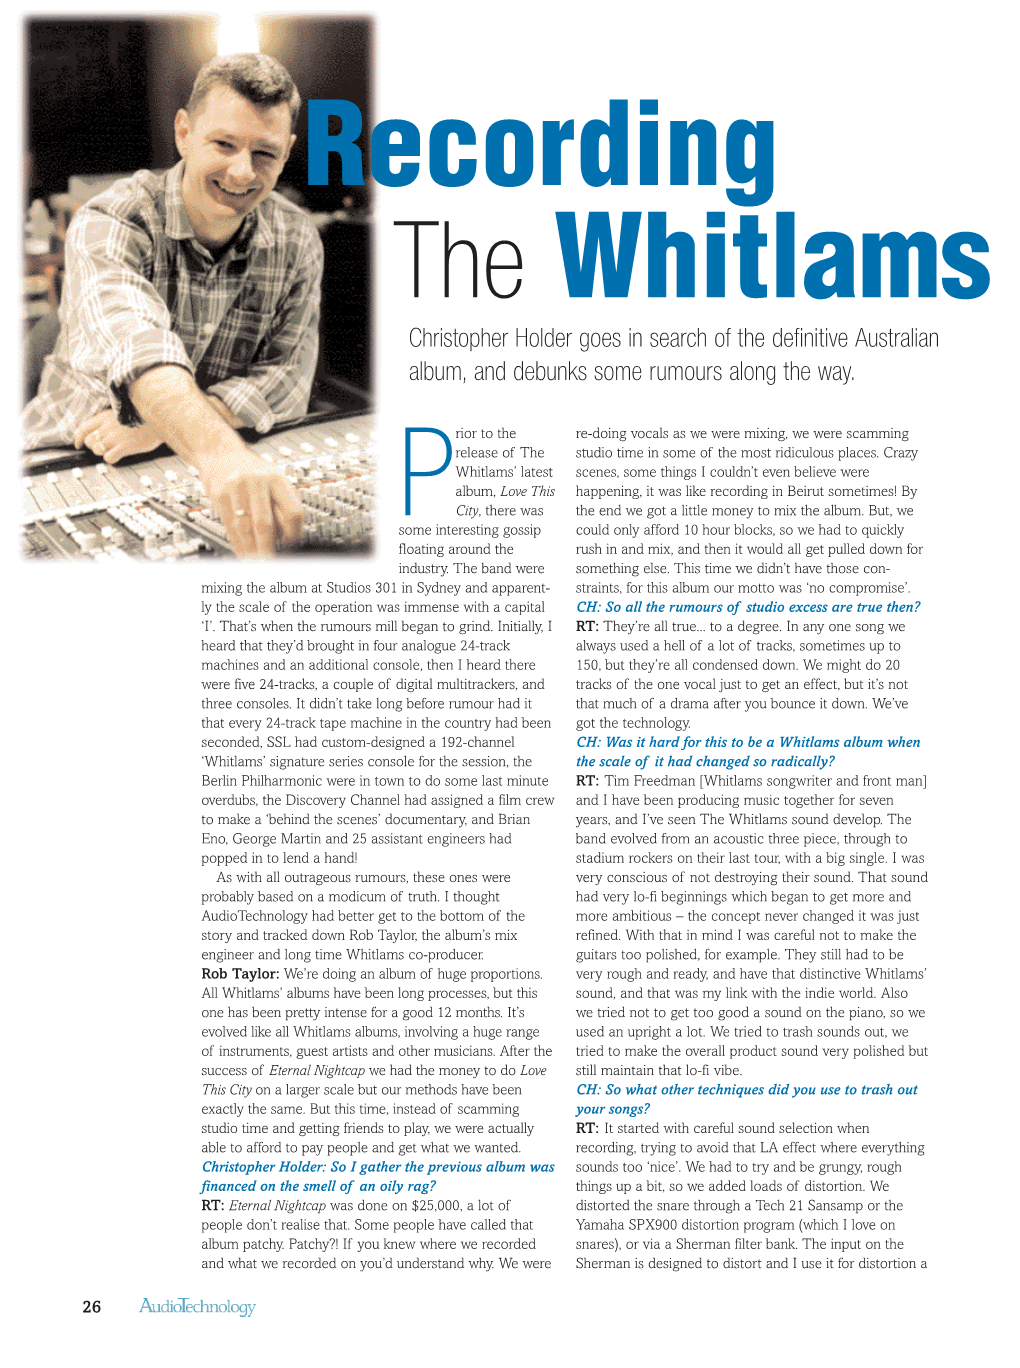 Recording the Whitlams Issue 8